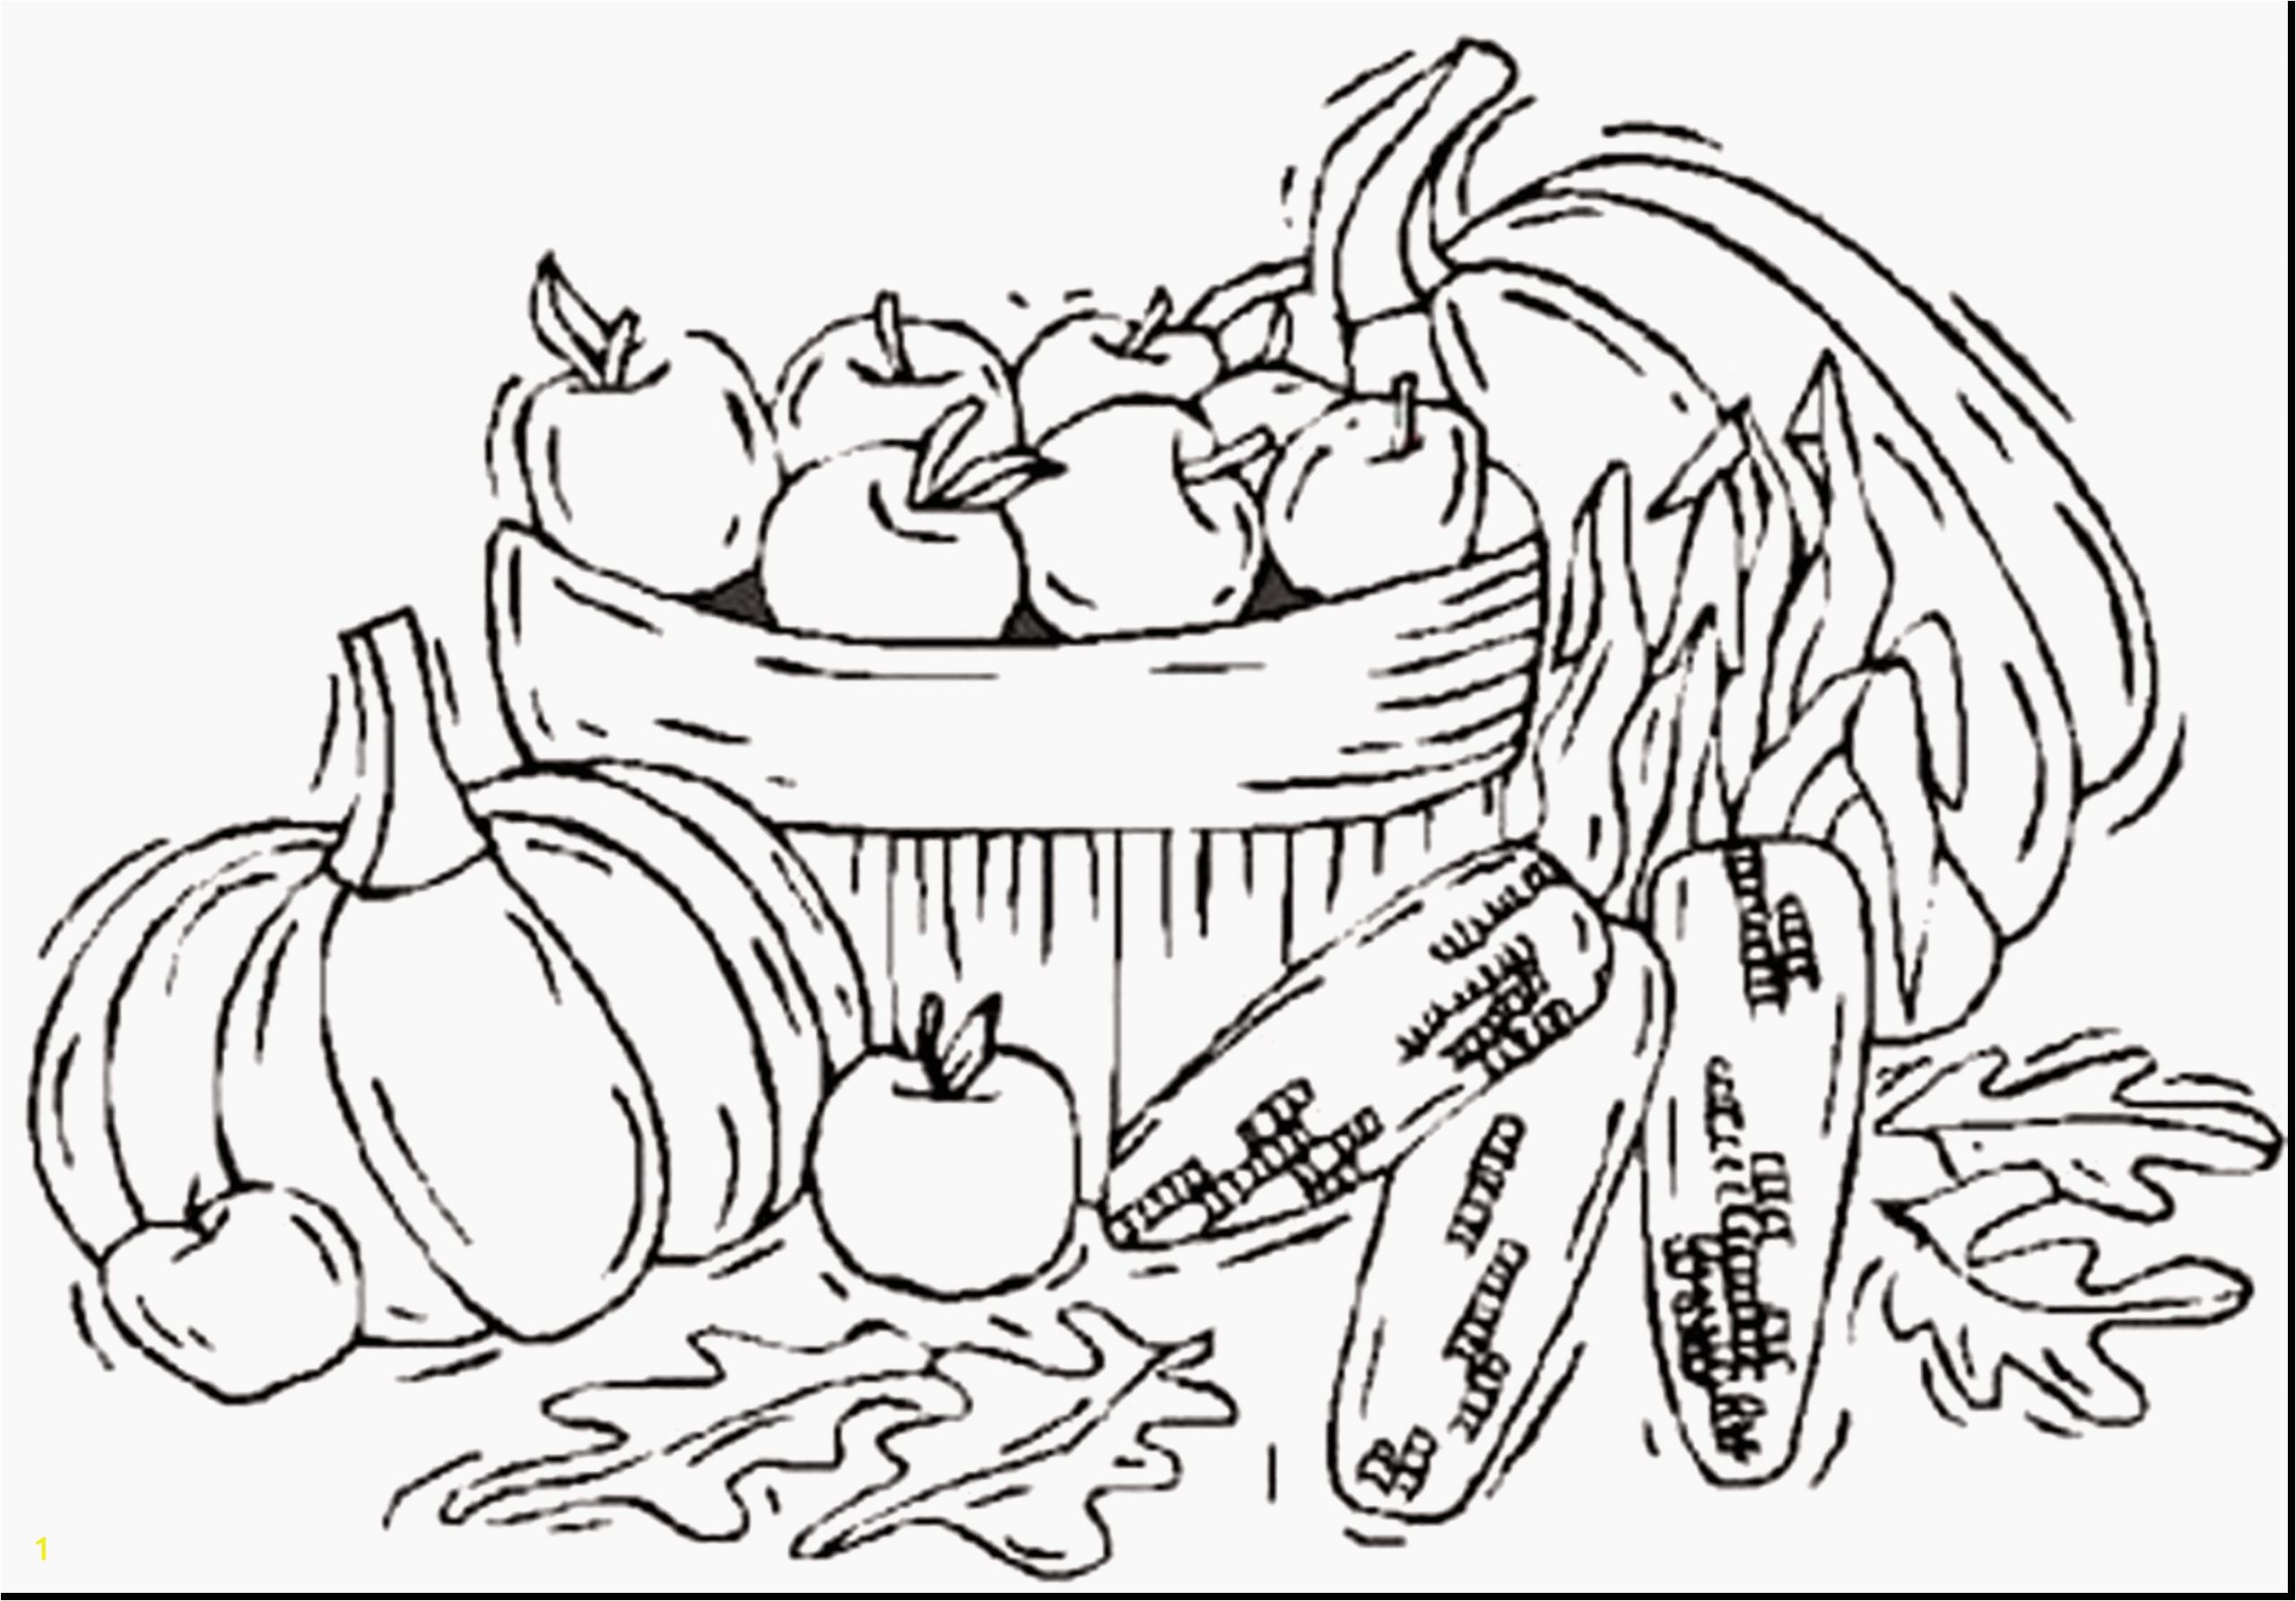 Printable Autumn Coloring Pages Fall Coloring Pages for P Telematik Institut